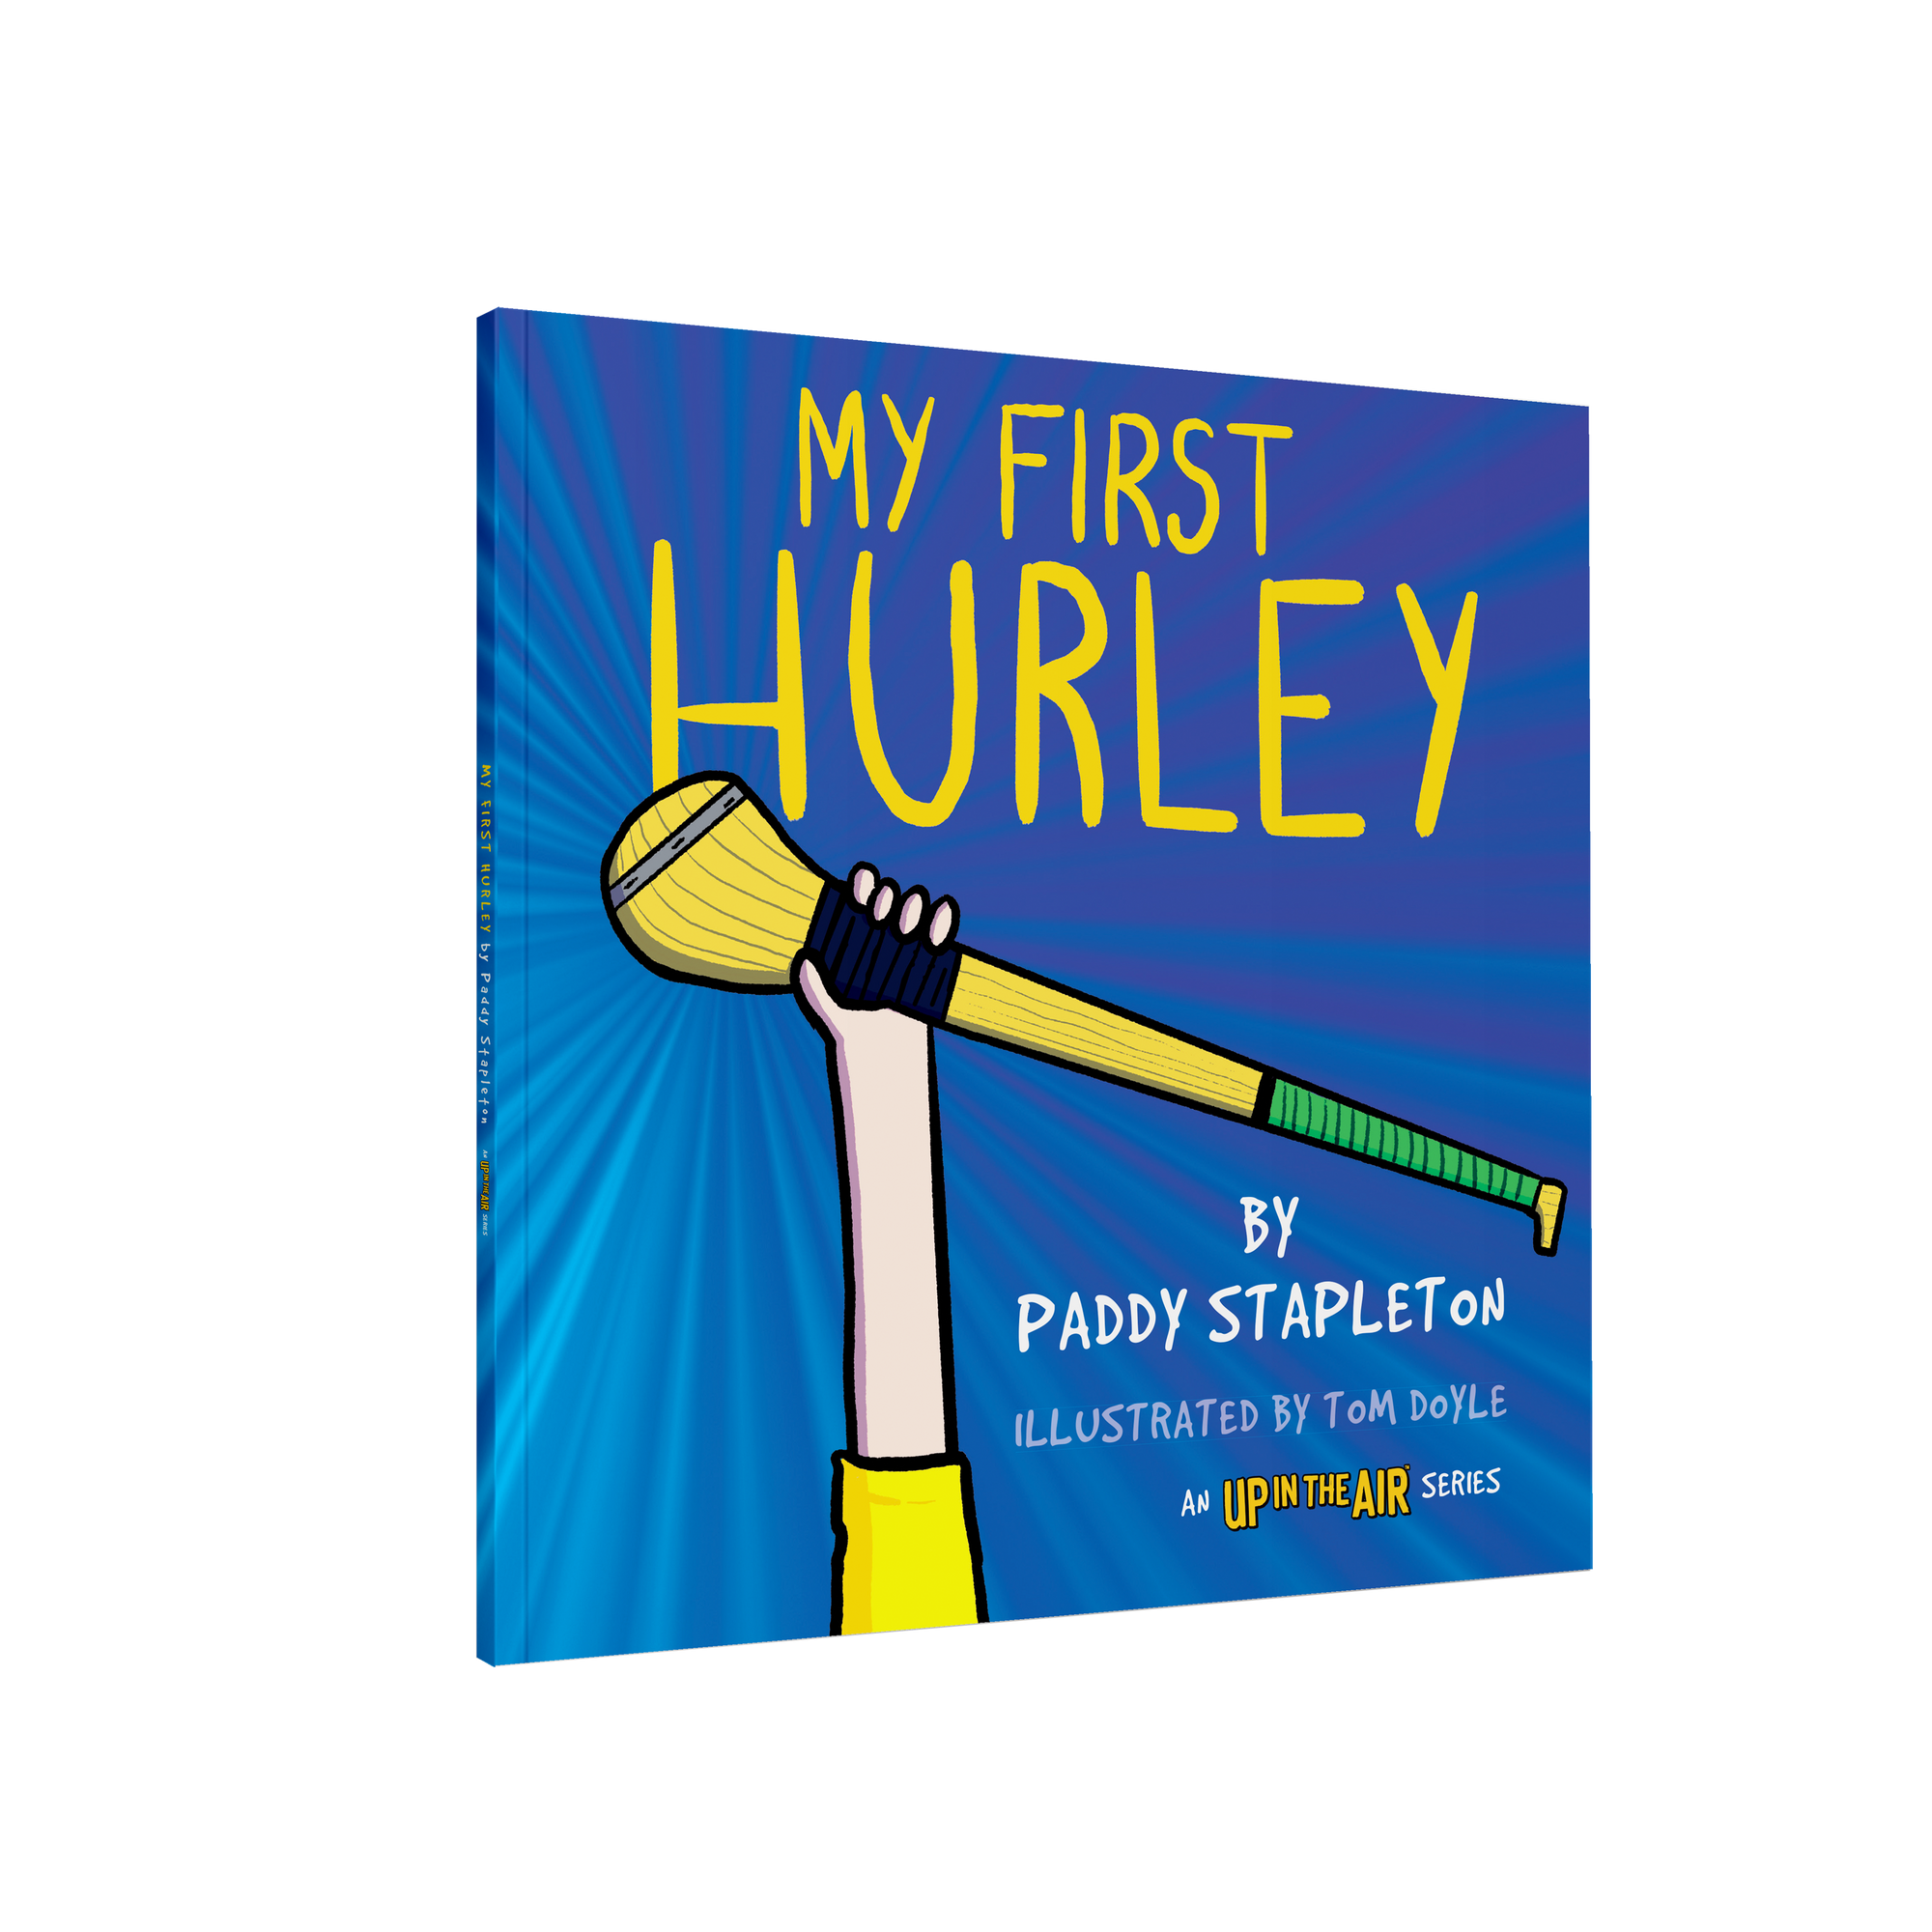 My First Hurley by Paddy Stapleton